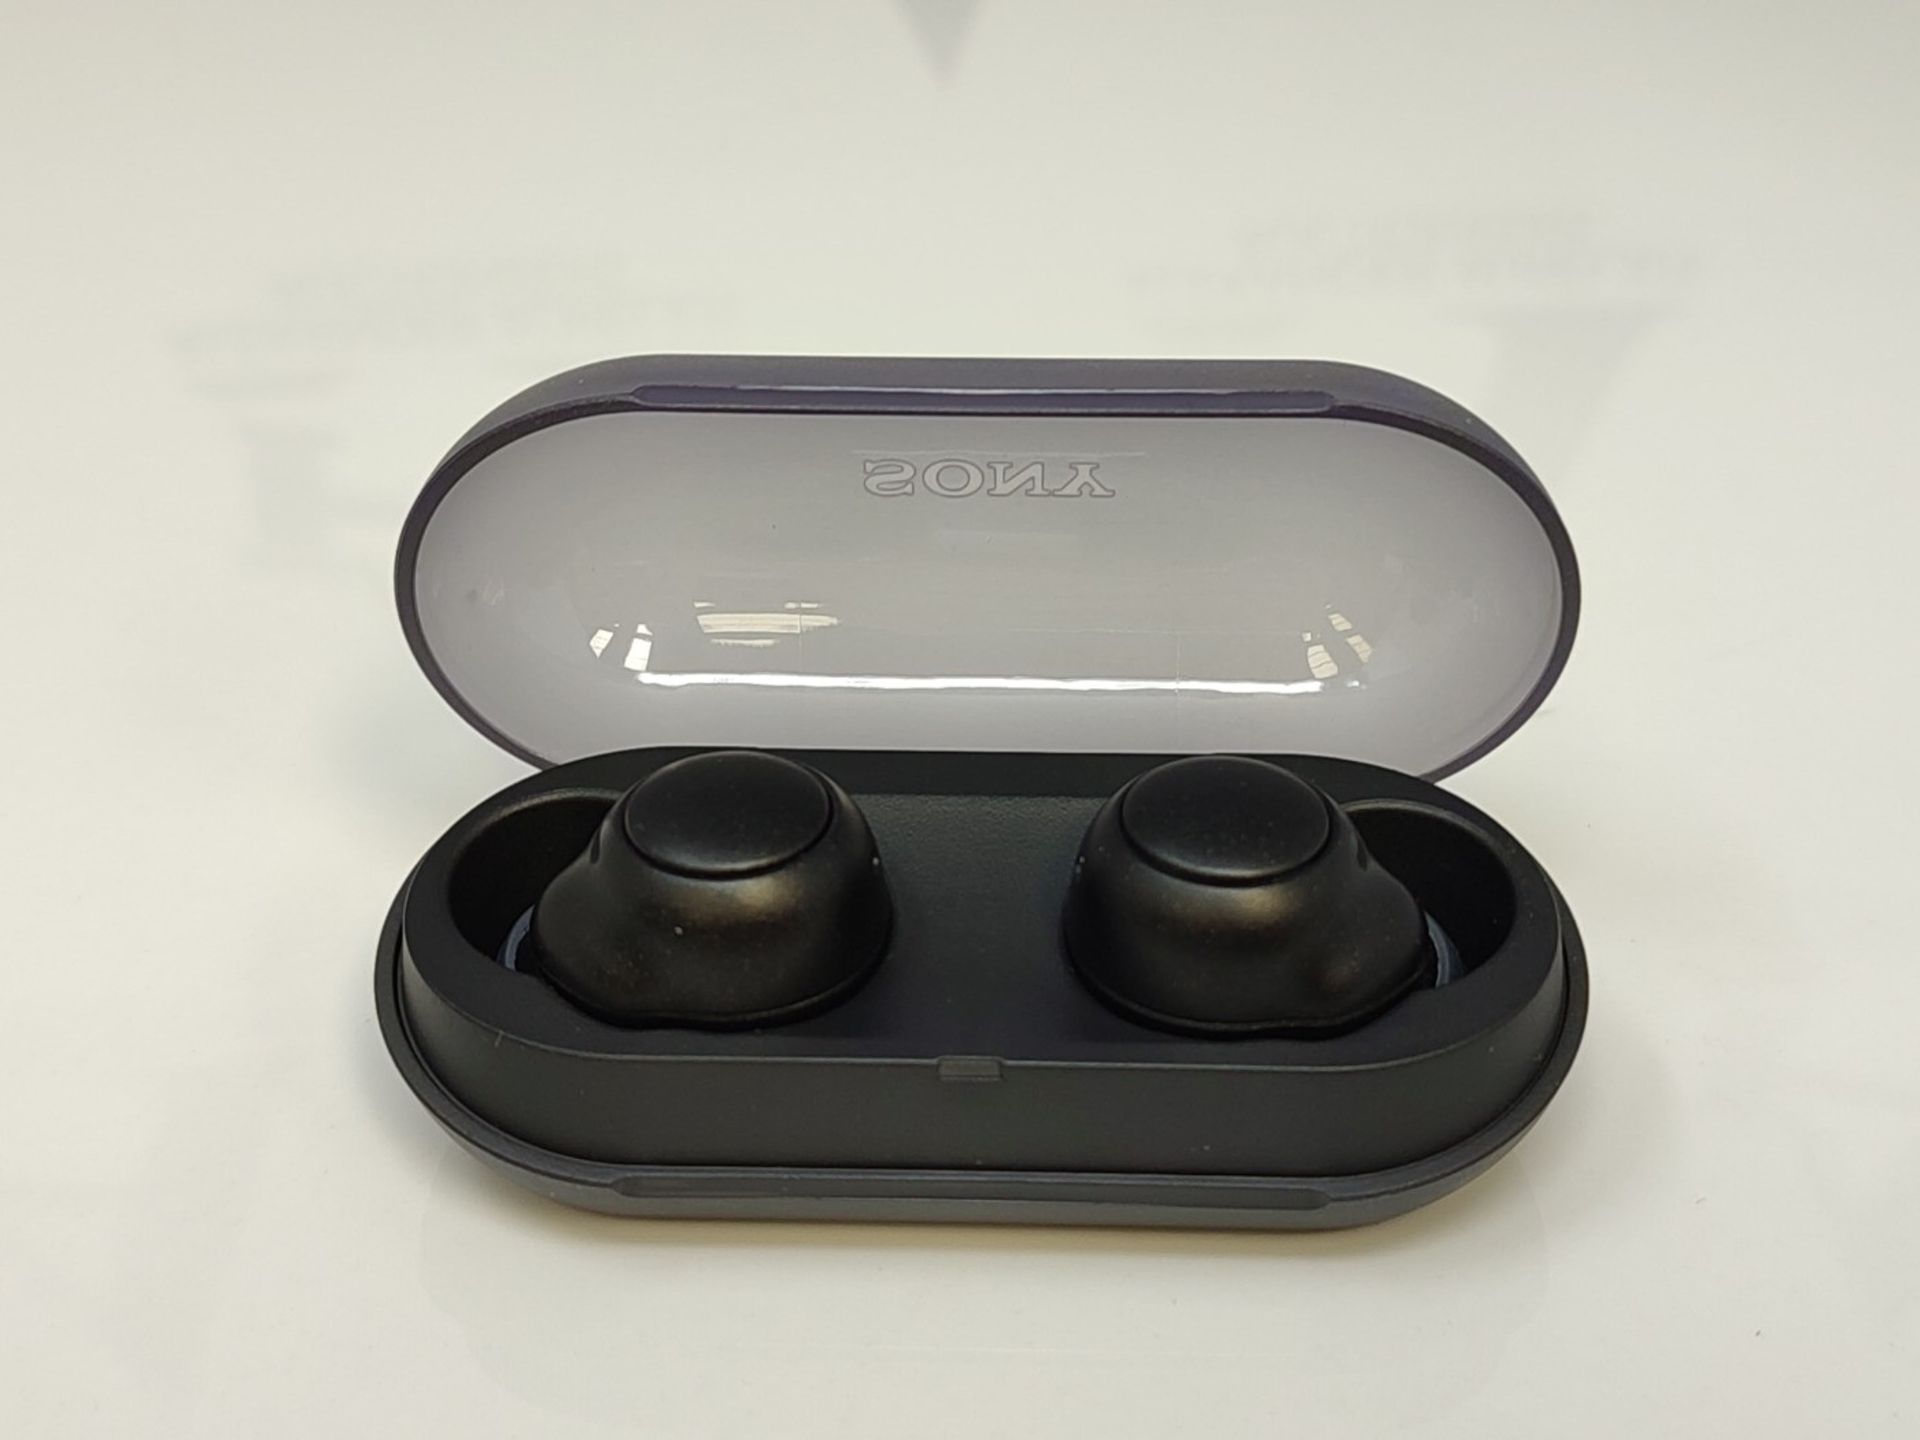 Sony WF-C500 | True Wireless Earphones, Up to 24h Battery Life and Fast Charging, IPX4 - Image 3 of 3